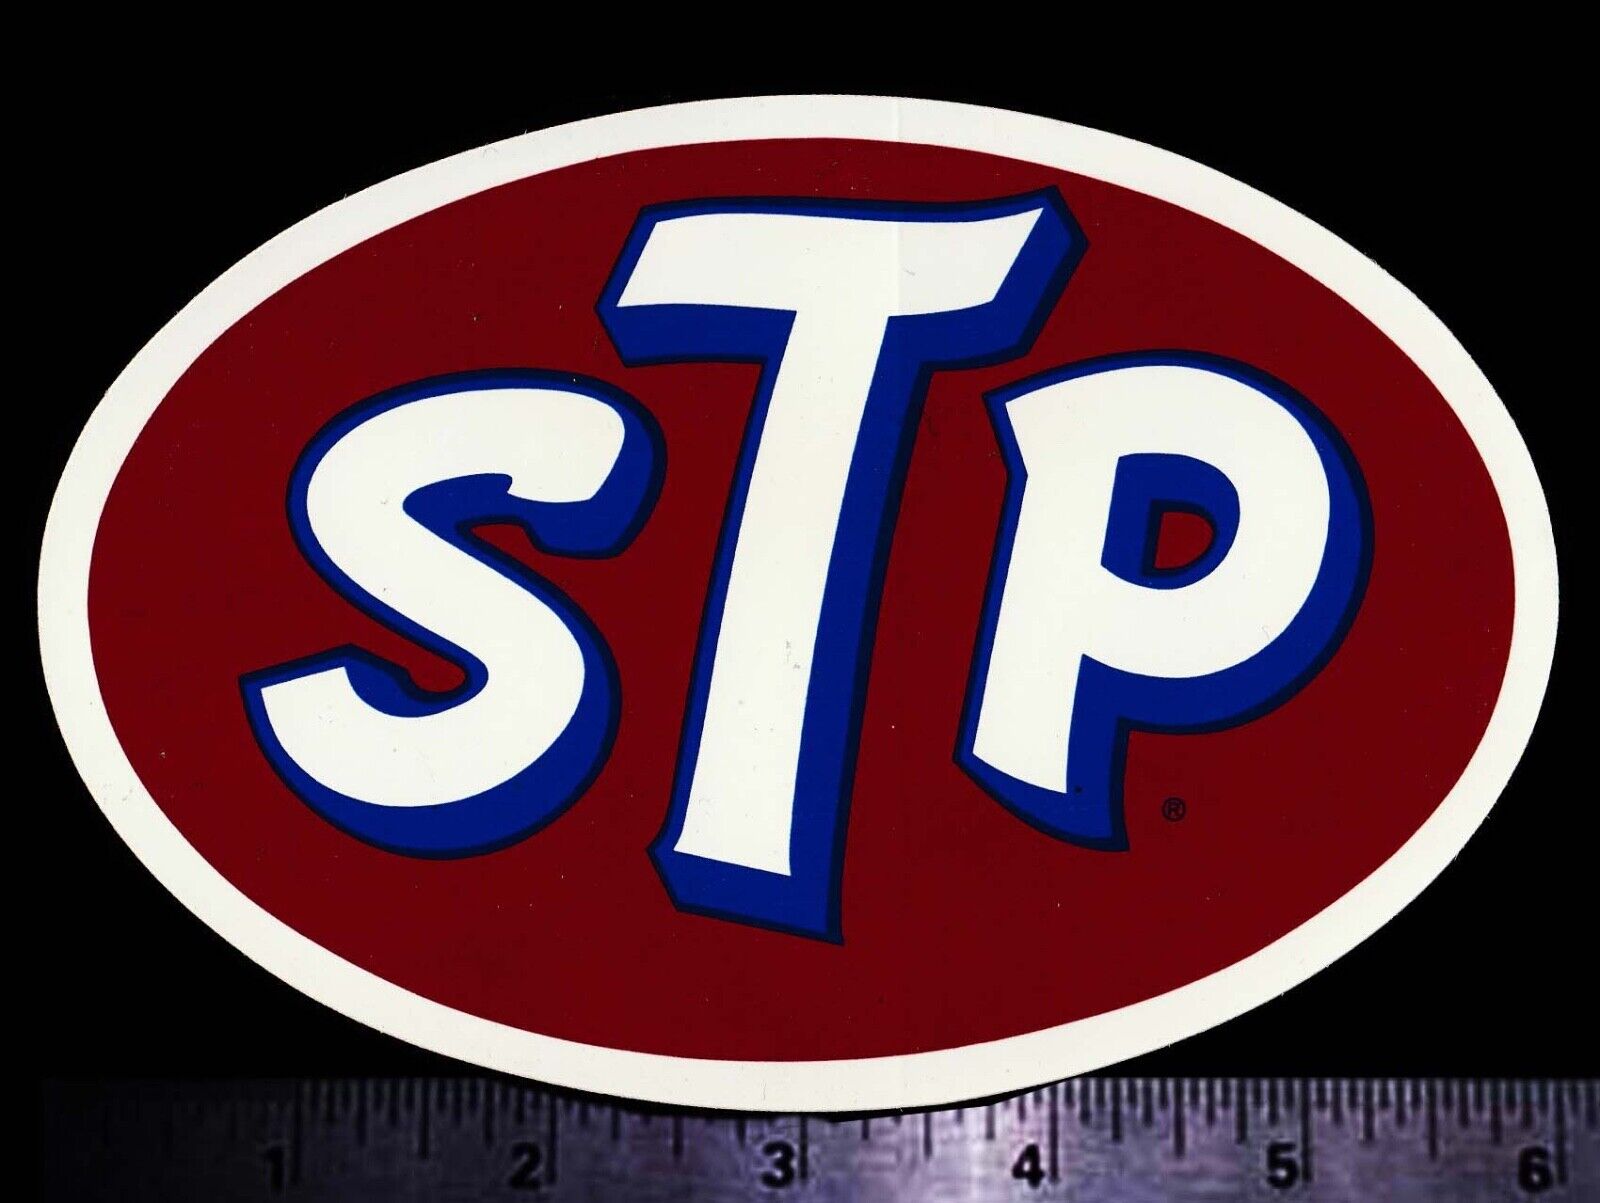 STP - Original Vintage 1970's 80's Racing Decal/Sticker - 6 Inch Size - Petty